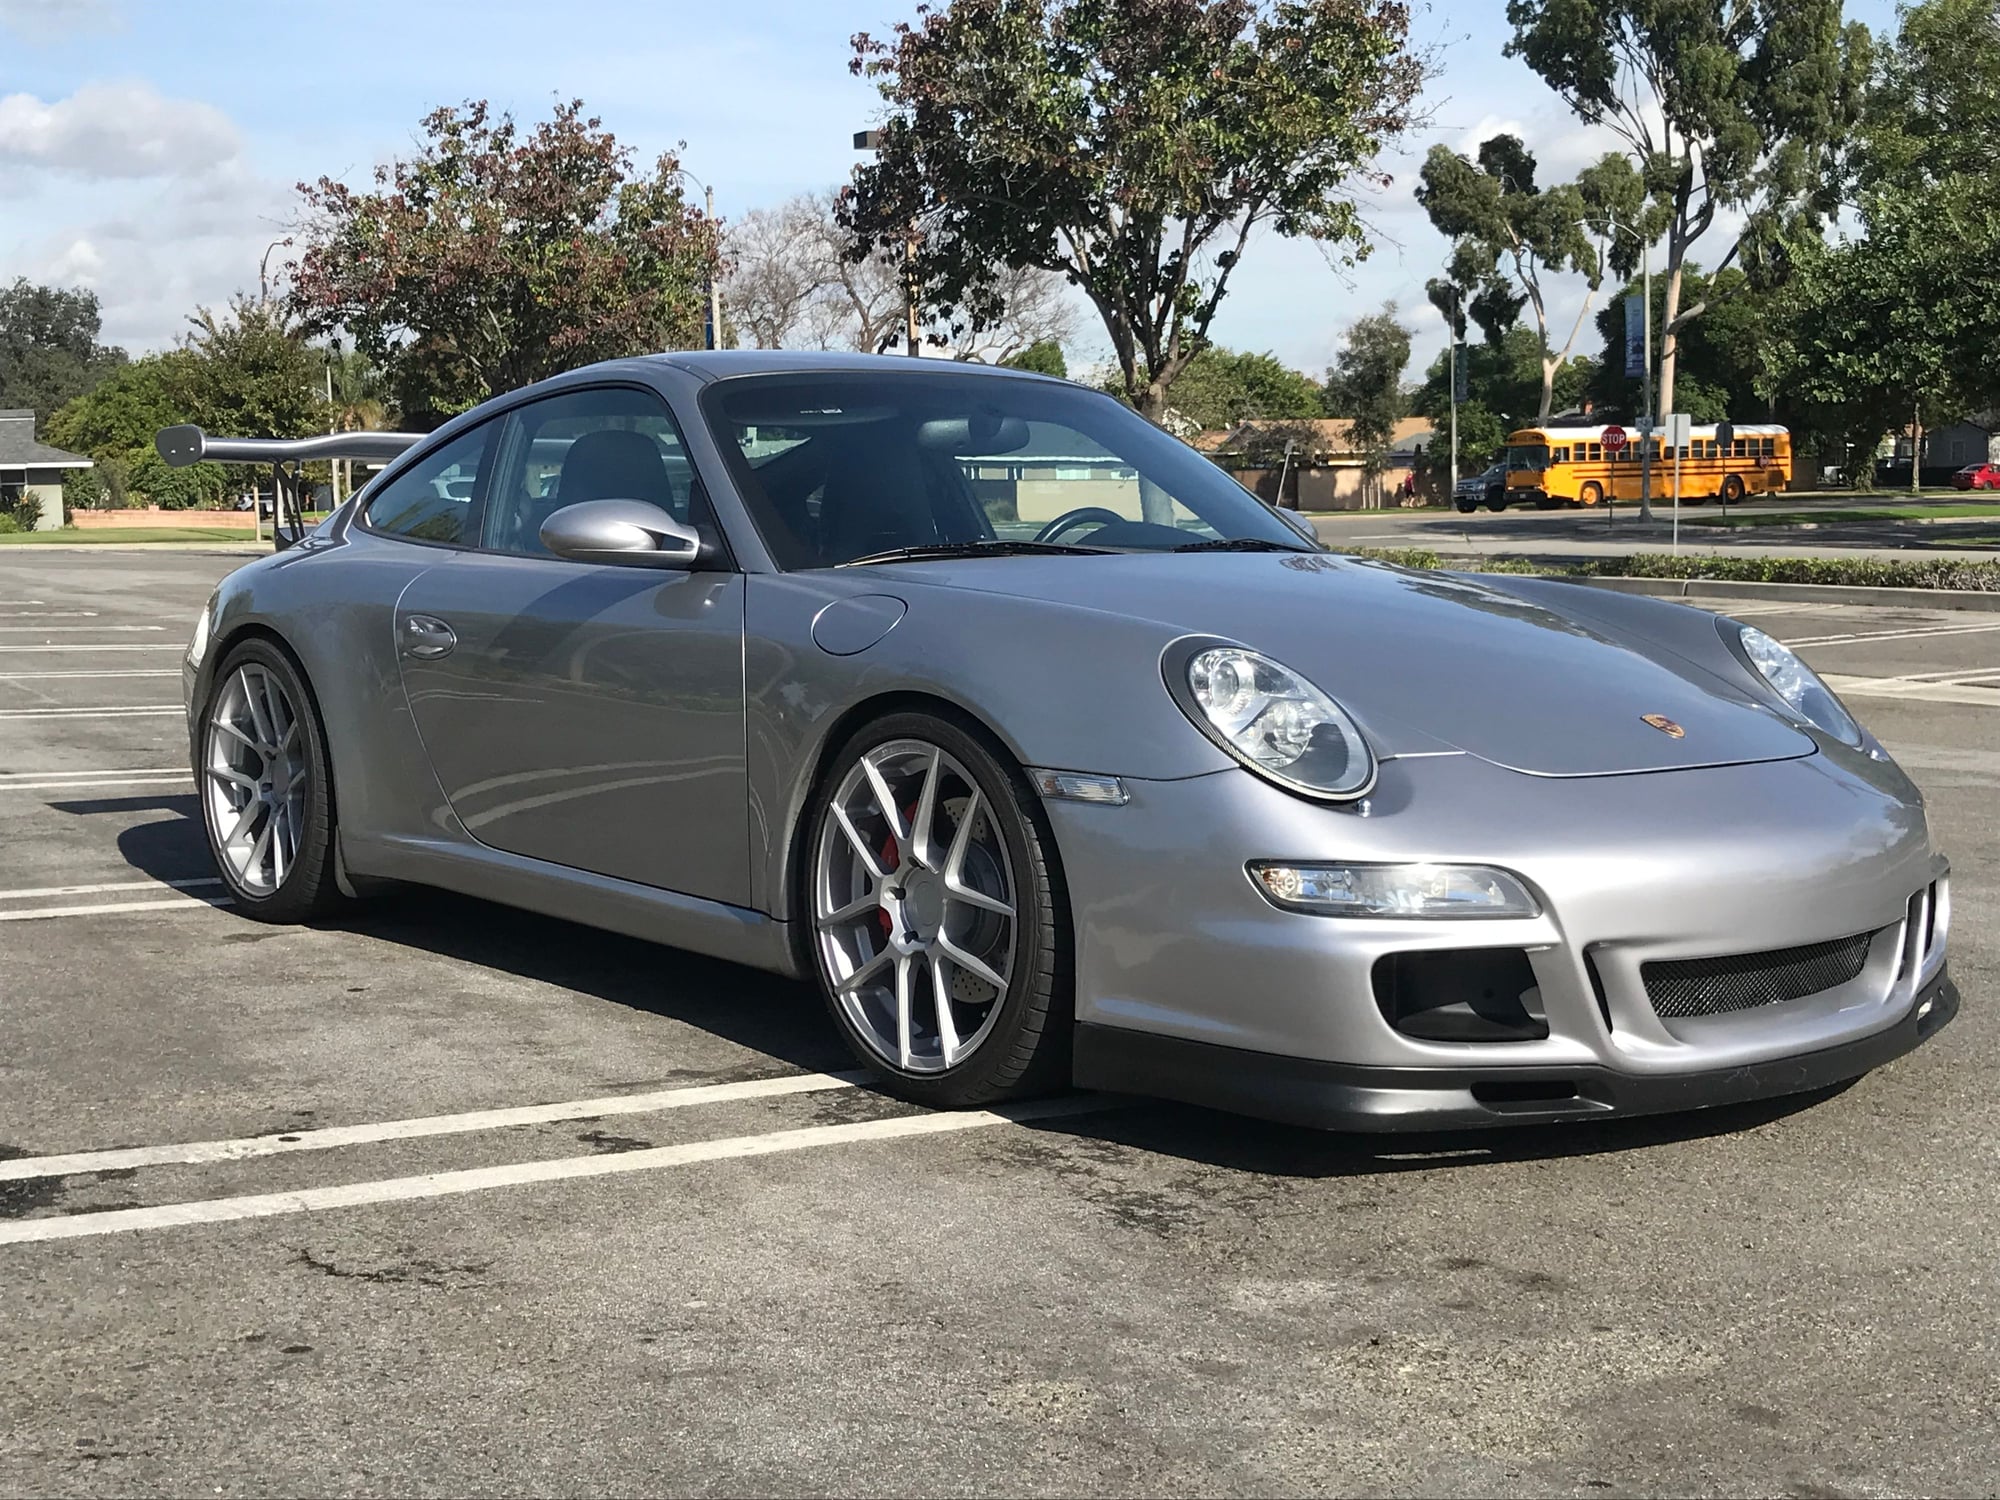 2006 Porsche 911 - SoCal: 2006 Porsche Carrera S 997.1 911 *Carfax Included* - Used - VIN WP0AB29926S744384 - 109,000 Miles - 6 cyl - 2WD - Manual - Coupe - Silver - Cerritos, CA 90701, United States